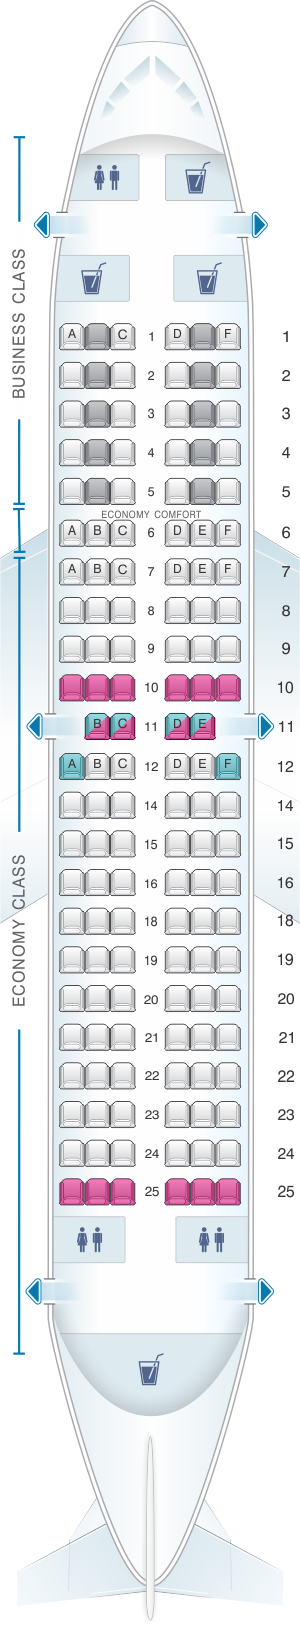 Boeing 737 Seating Chart Klm